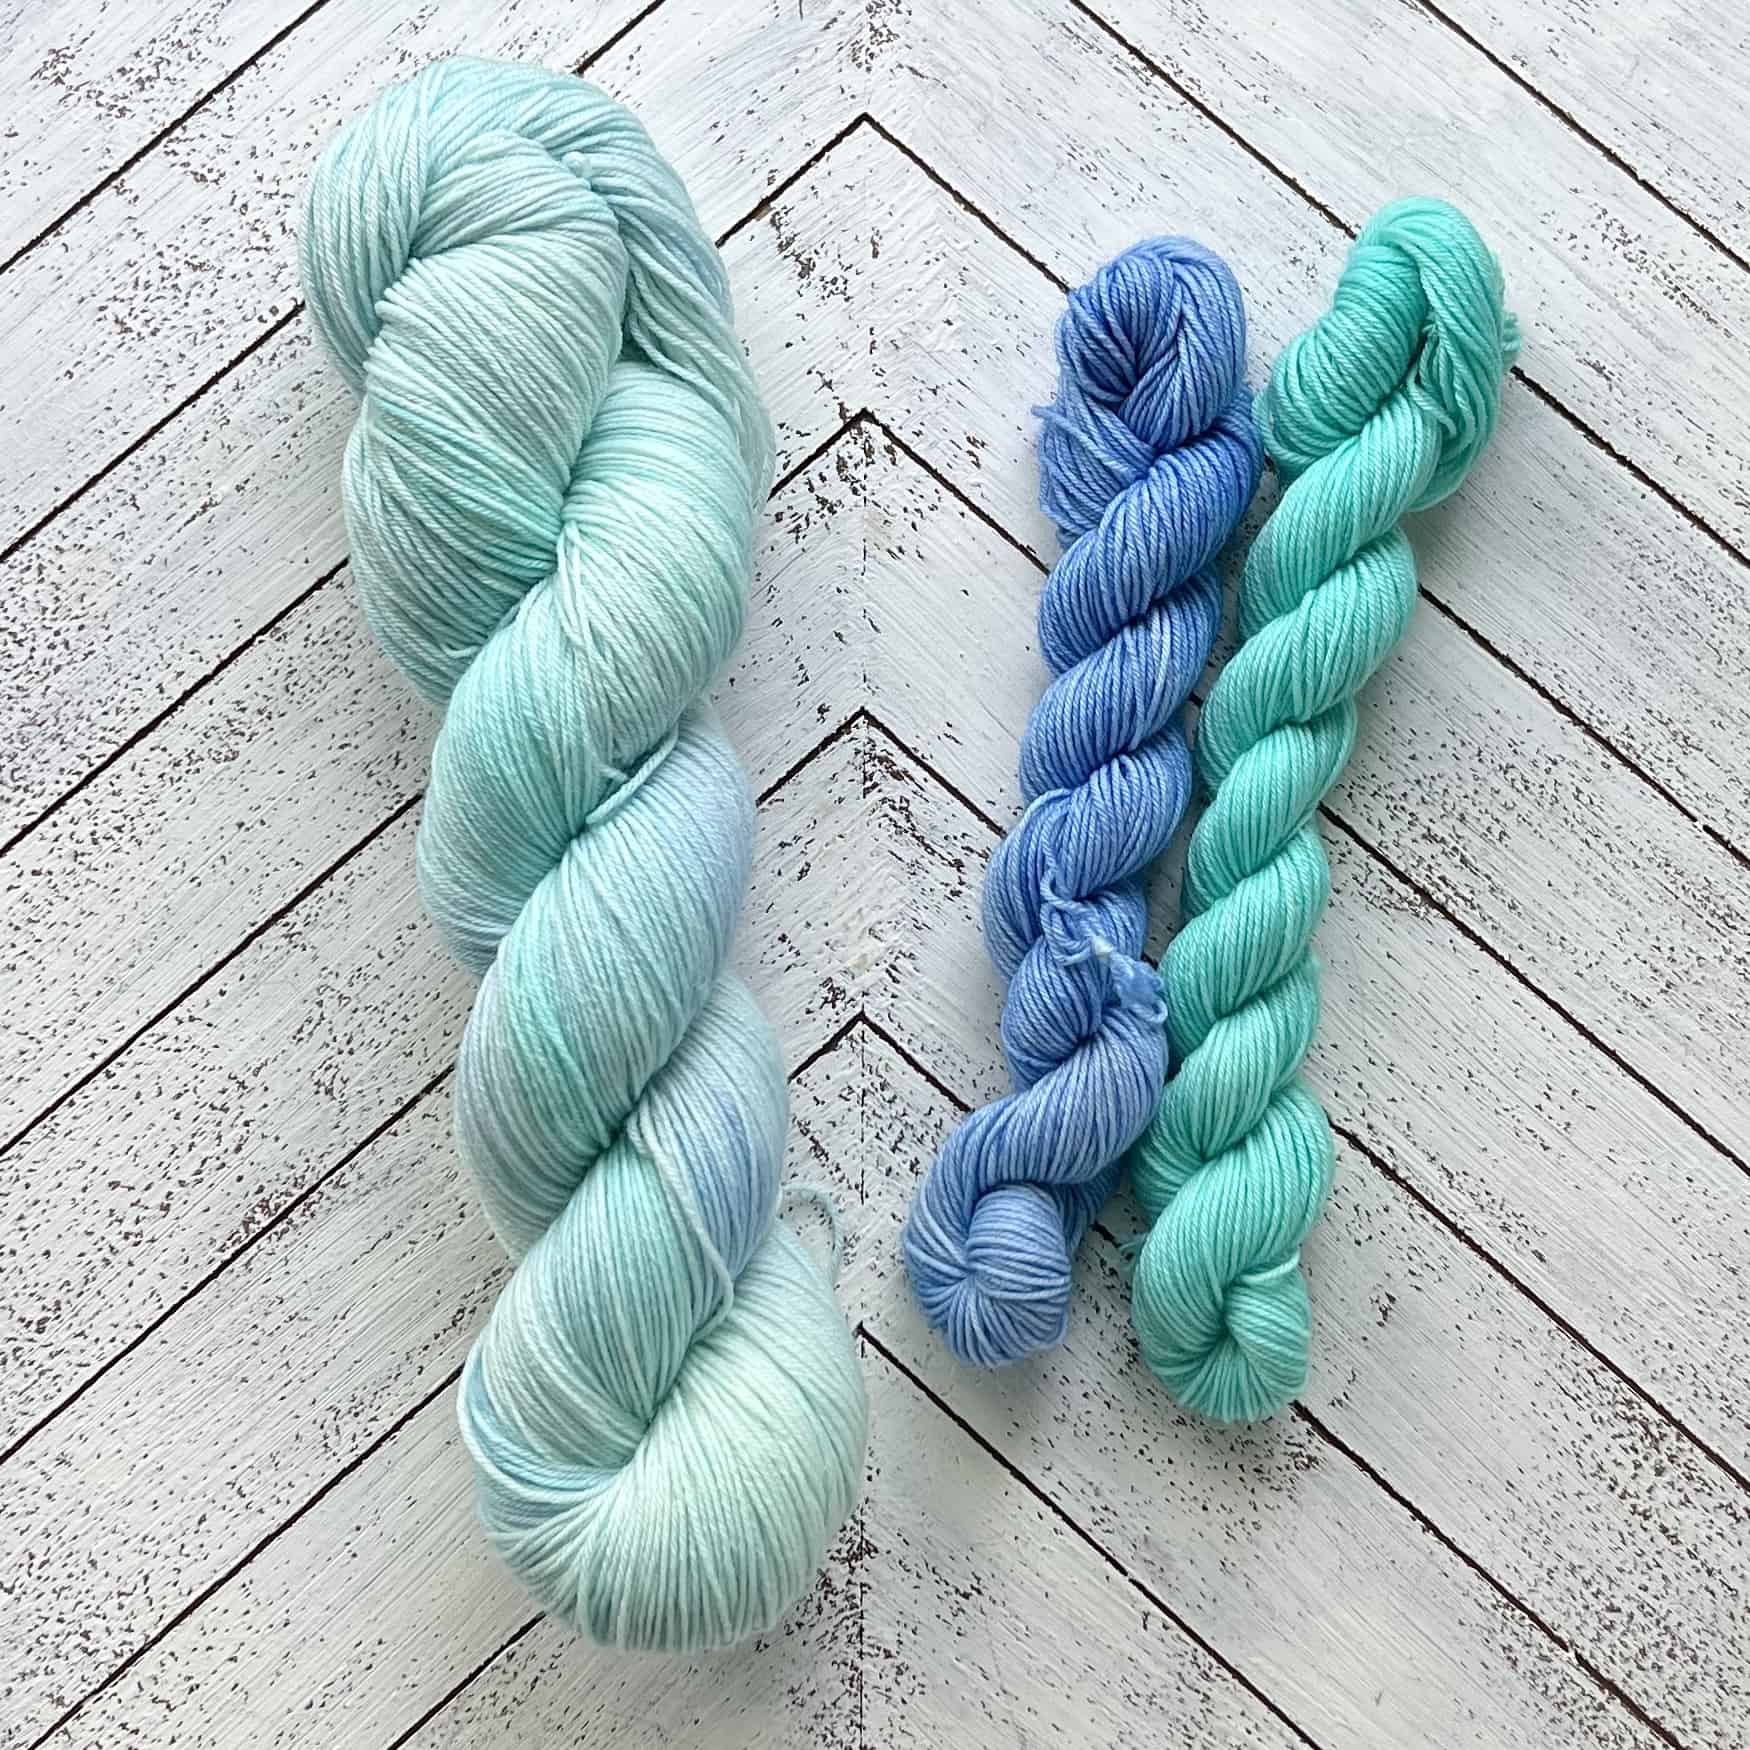 A large skein of pale blue yarn and two small skeins of blue and aqua yarn.